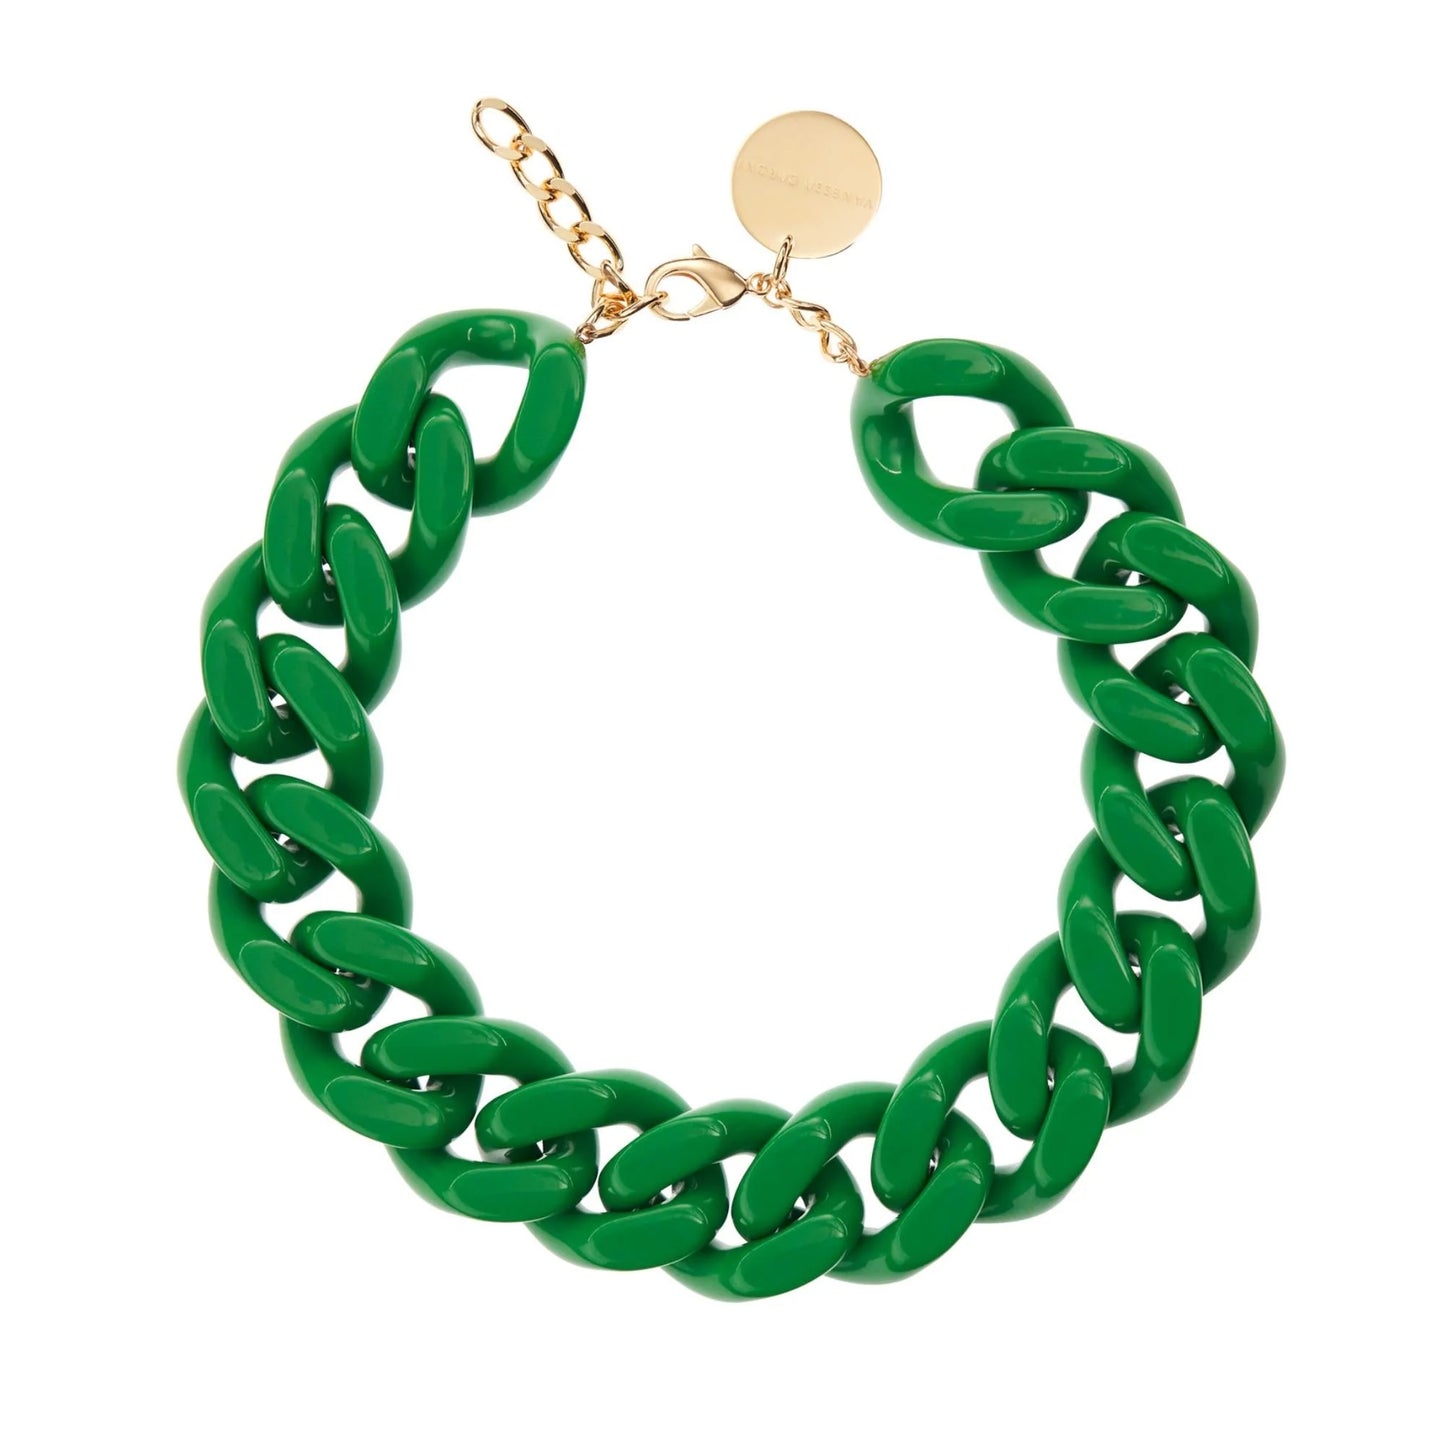 Big Flat Chain Necklace - Green by Vanessa Baroni